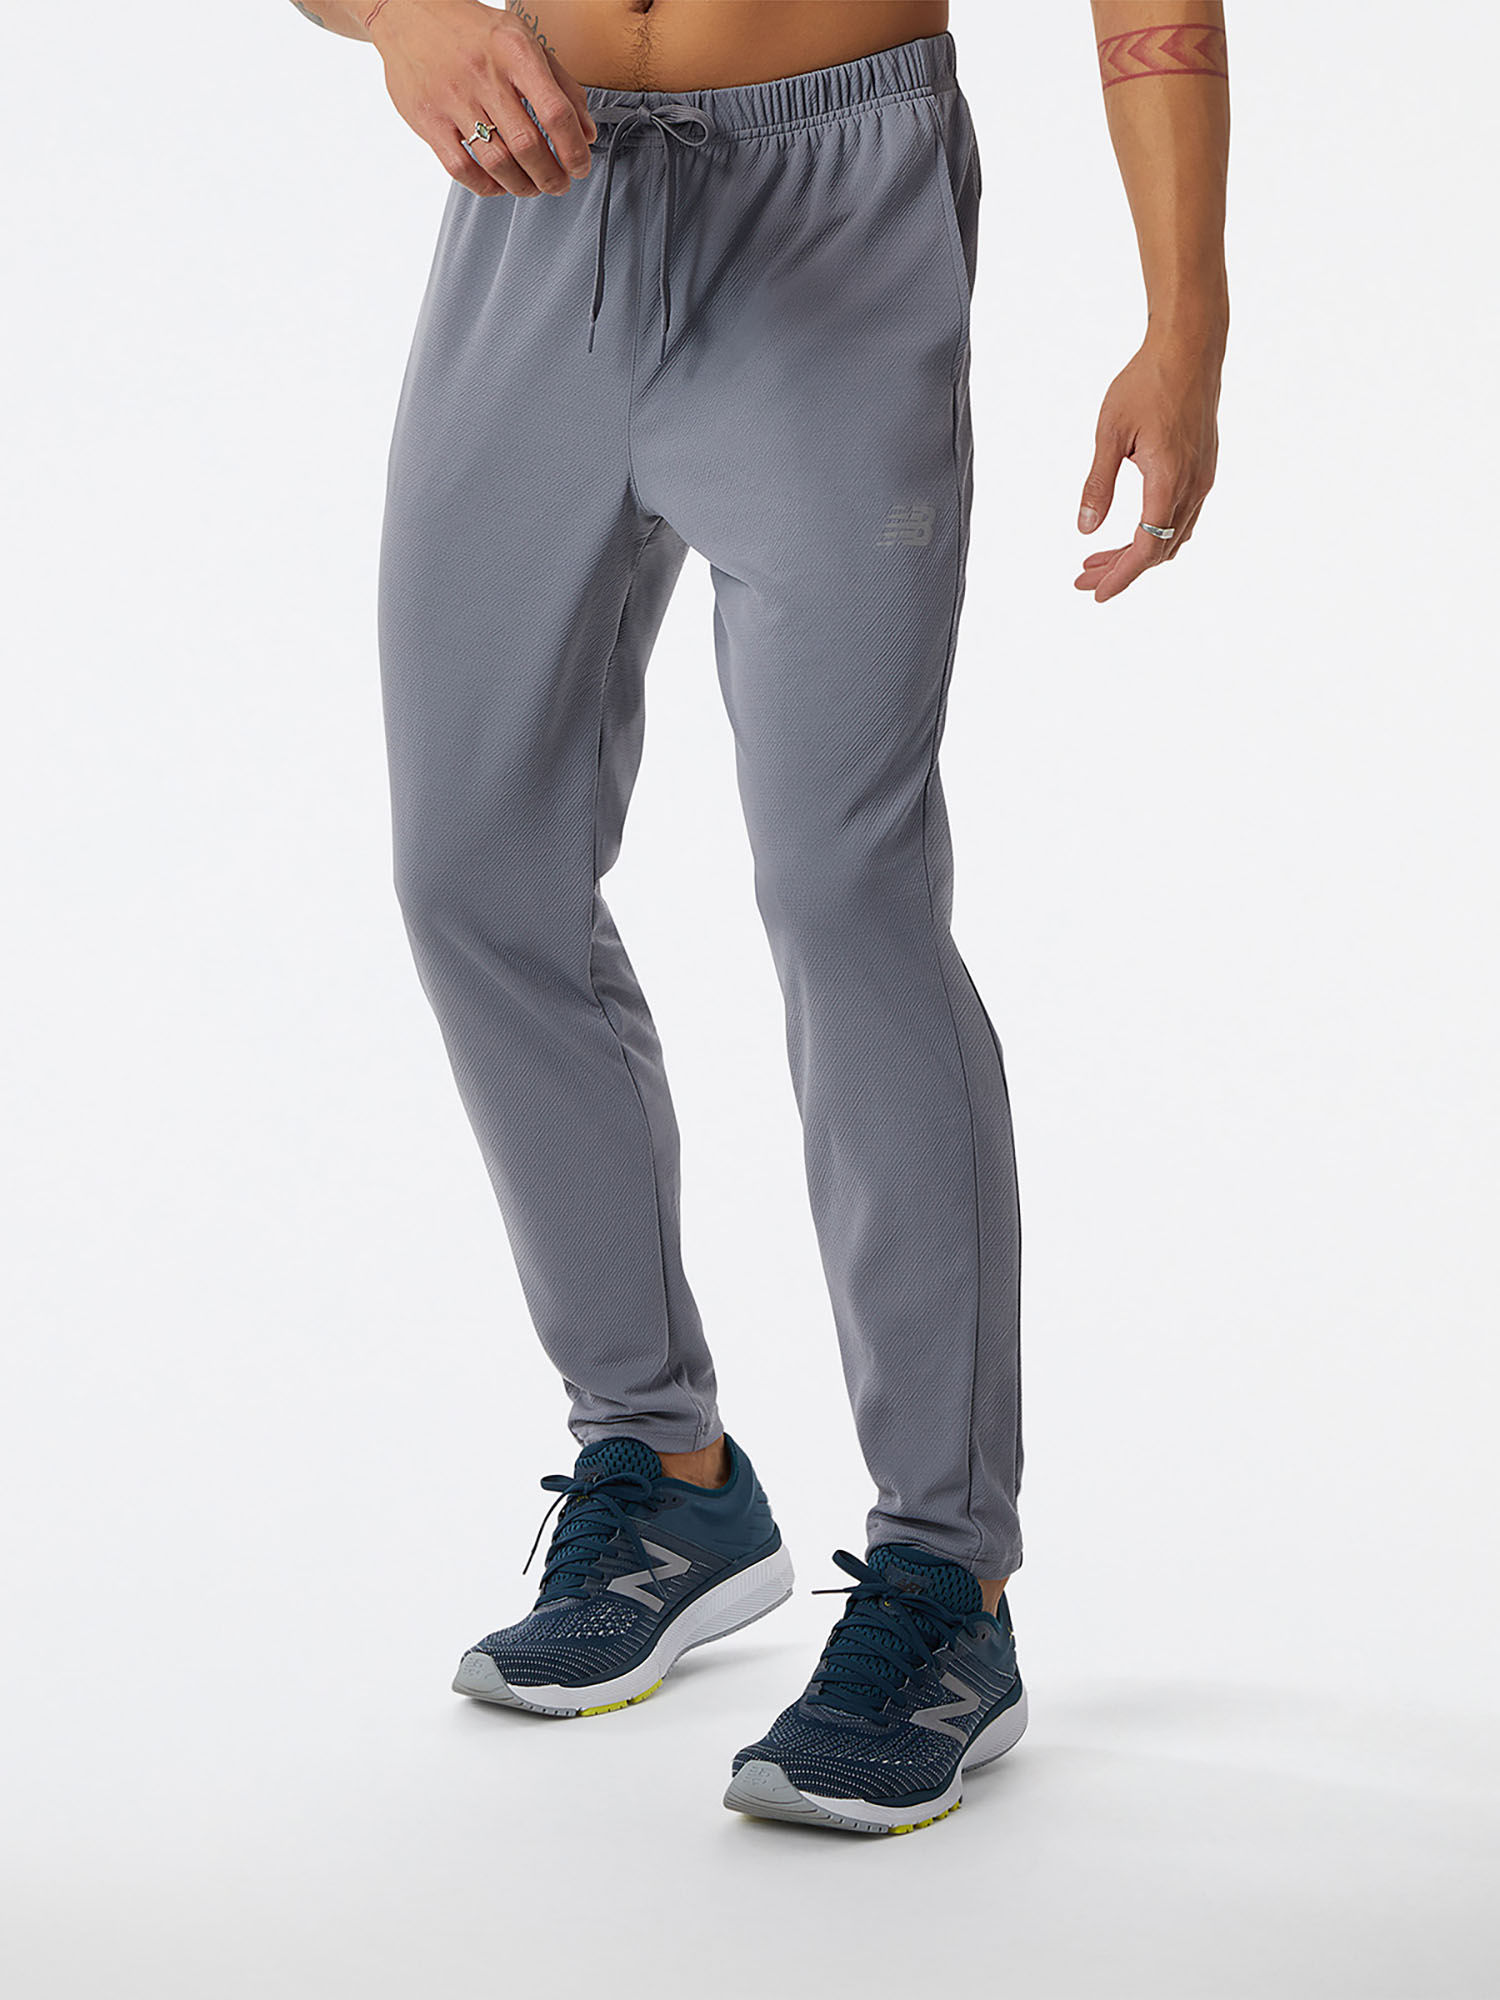 Training Woven Performance Pants in night black | Reebok Official Slovakia